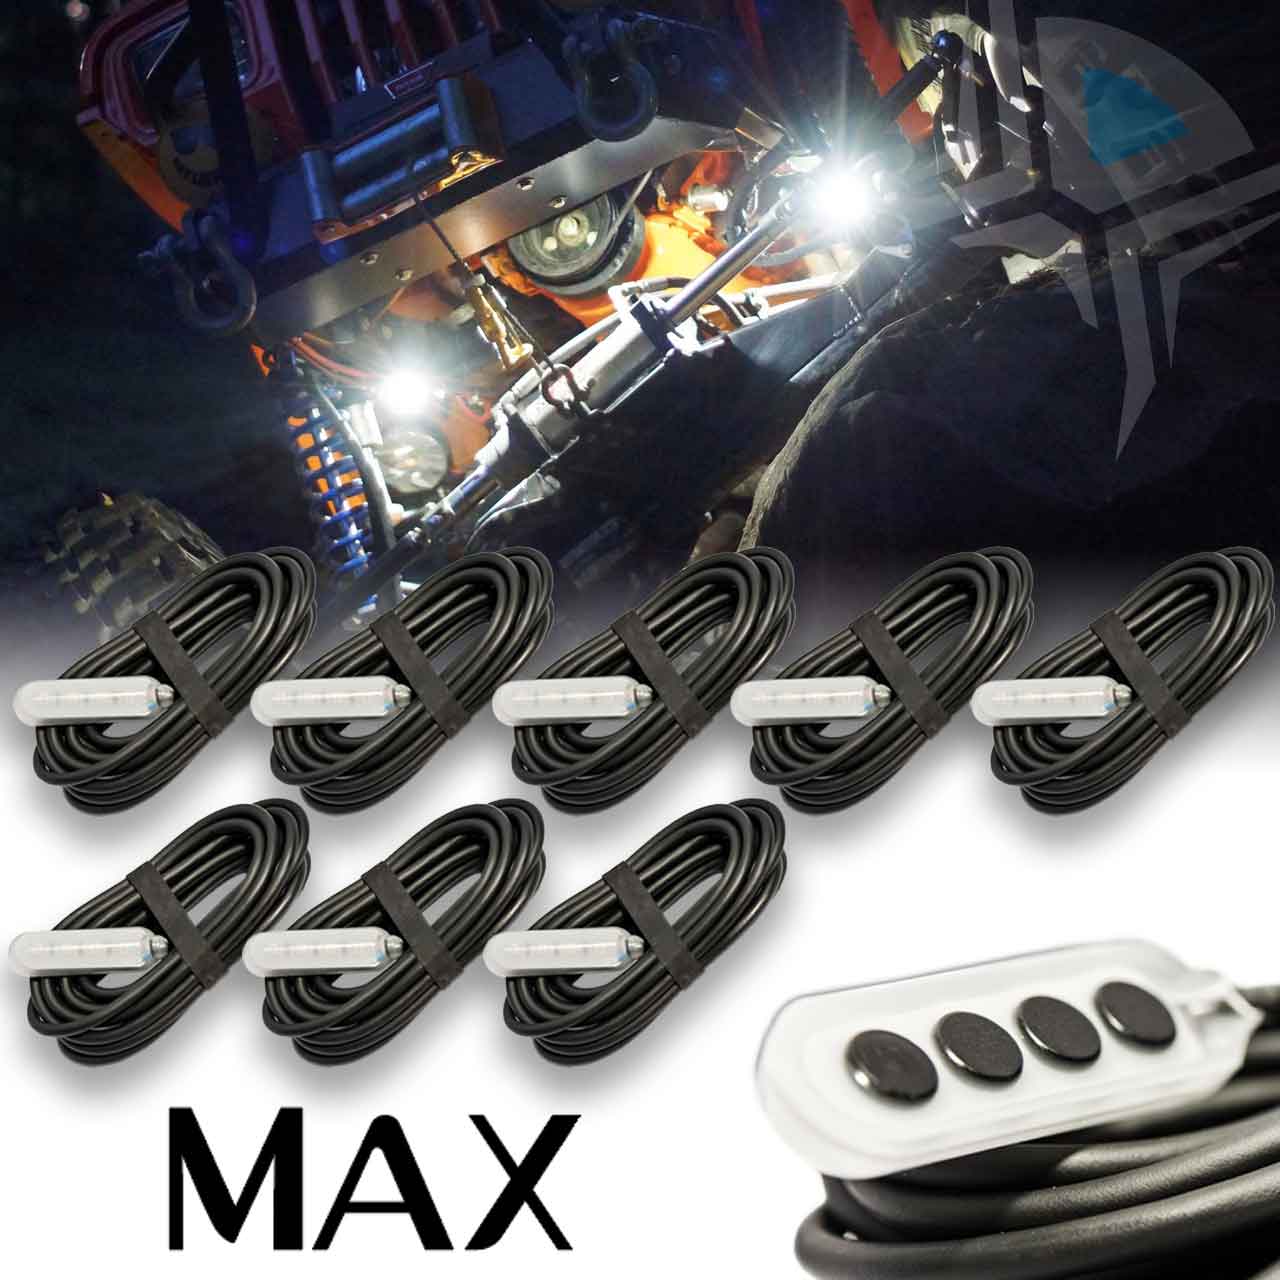 LUX MAX White LED Magnetic Rock Light Kit for Jeeps Piece Ground Coverage